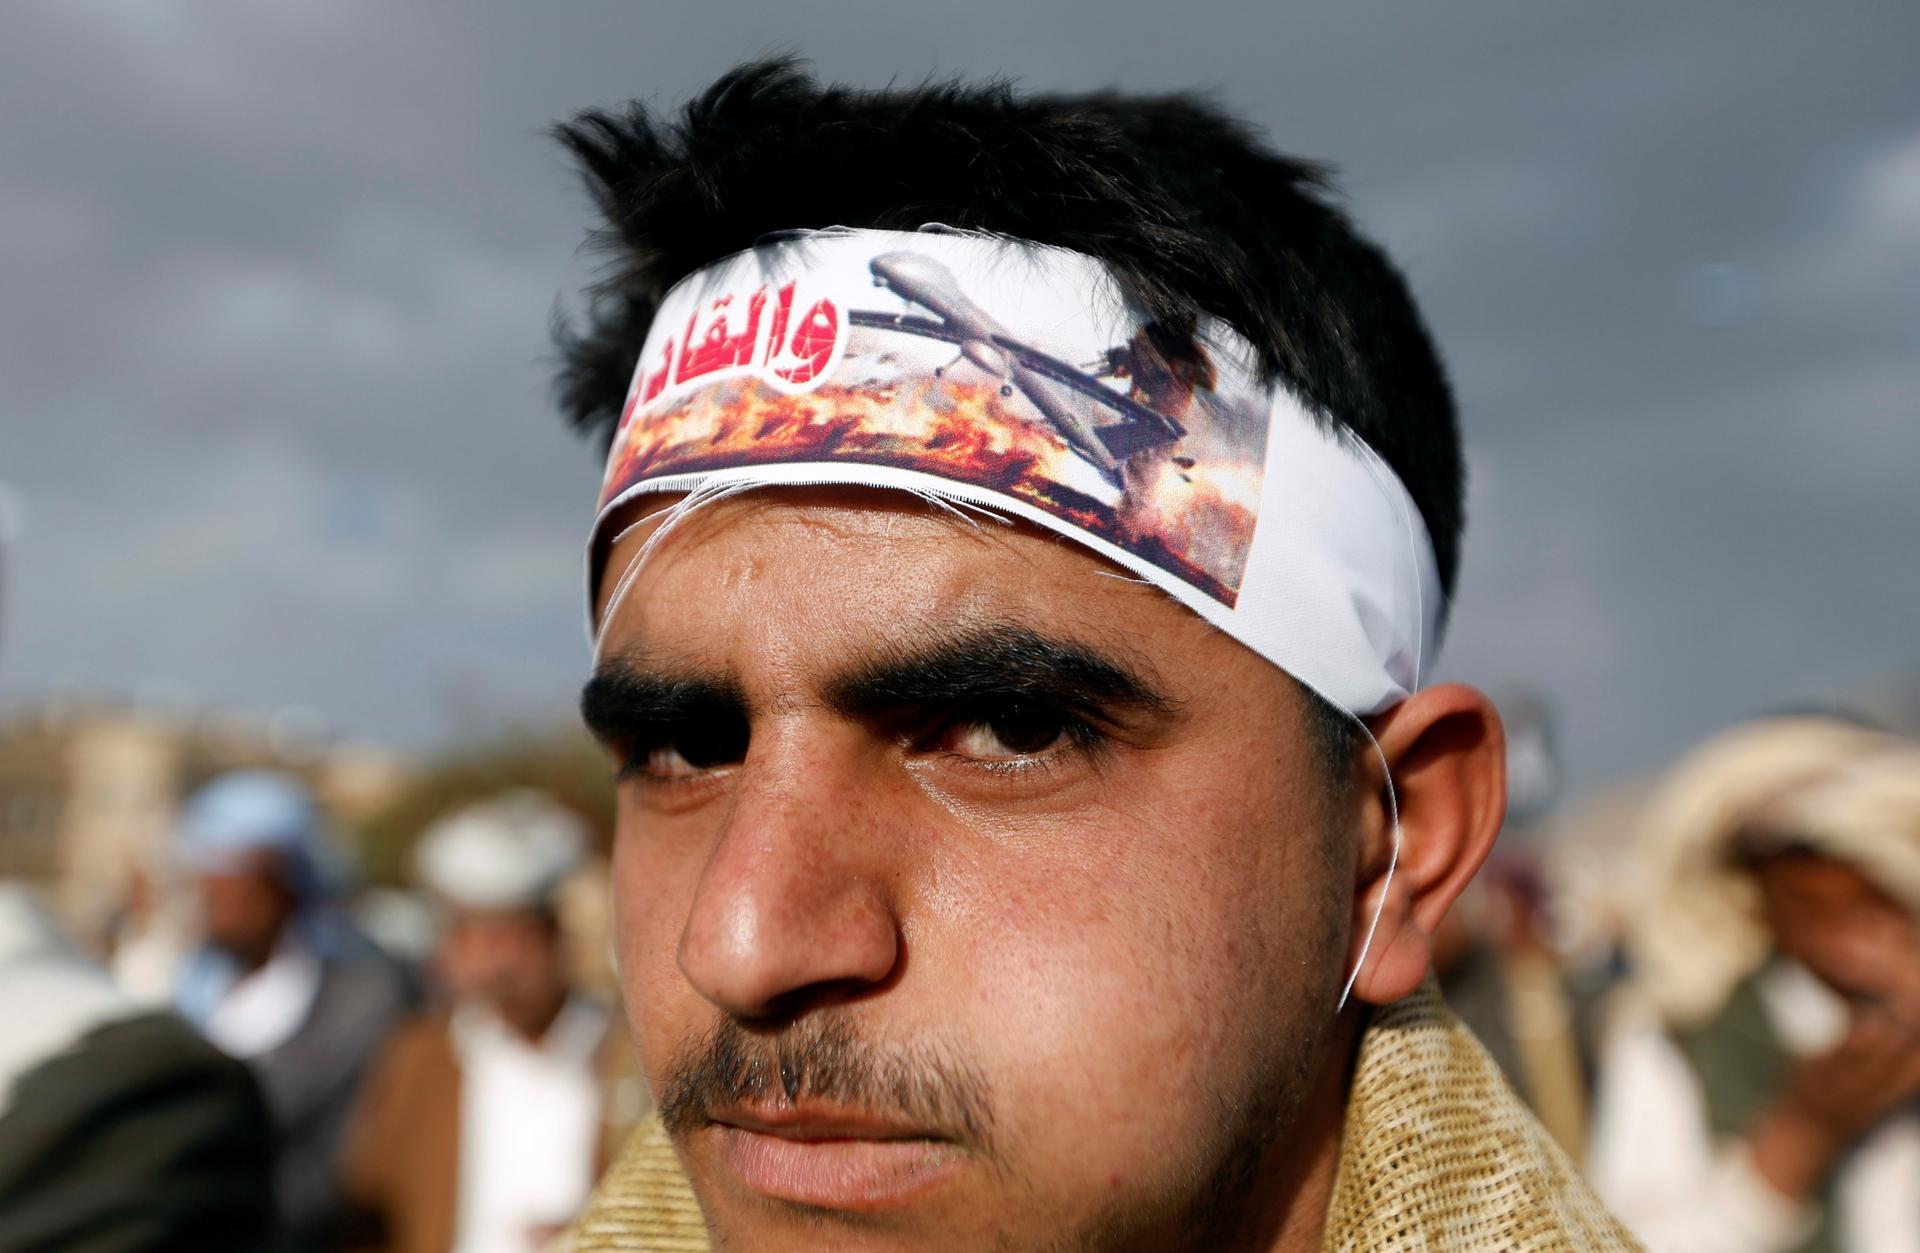 Young man wears headband showing image of drone attack